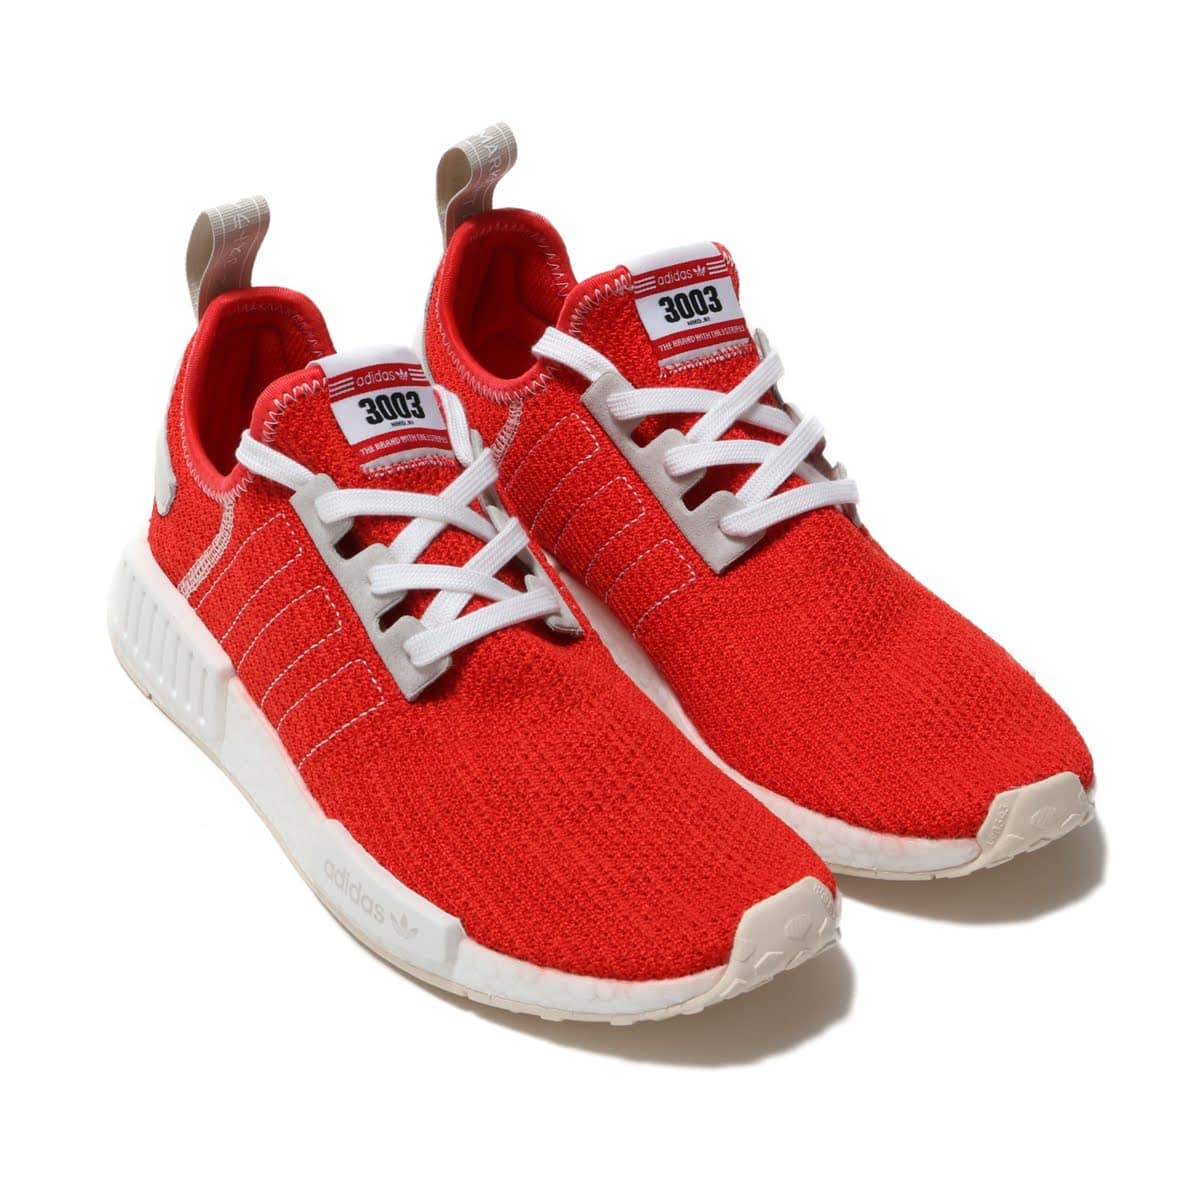 nmd r1 3003 red